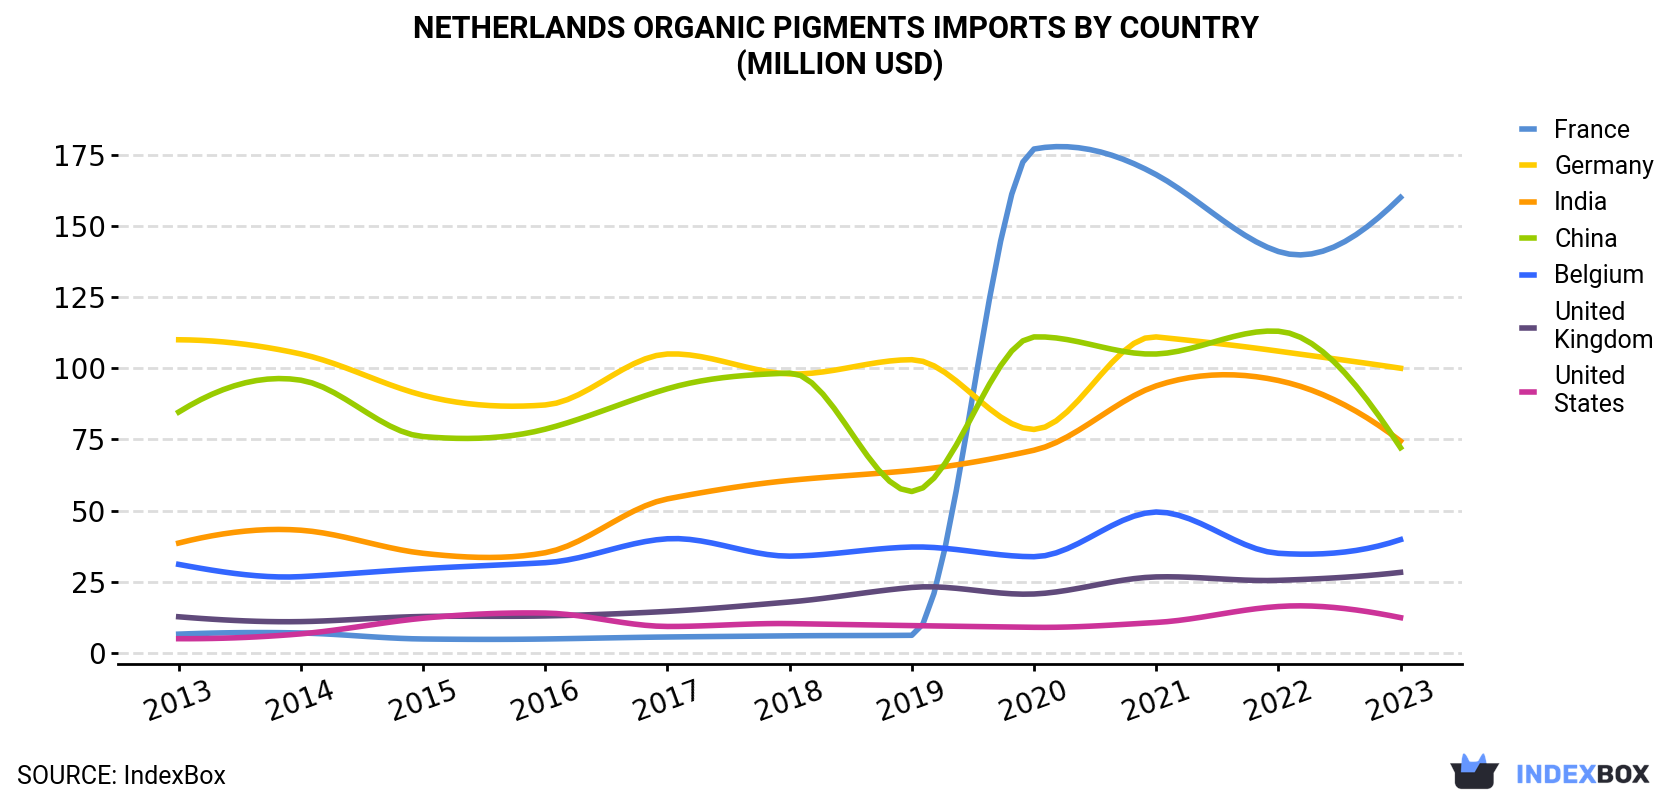 Netherlands Organic Pigments Imports By Country (Million USD)